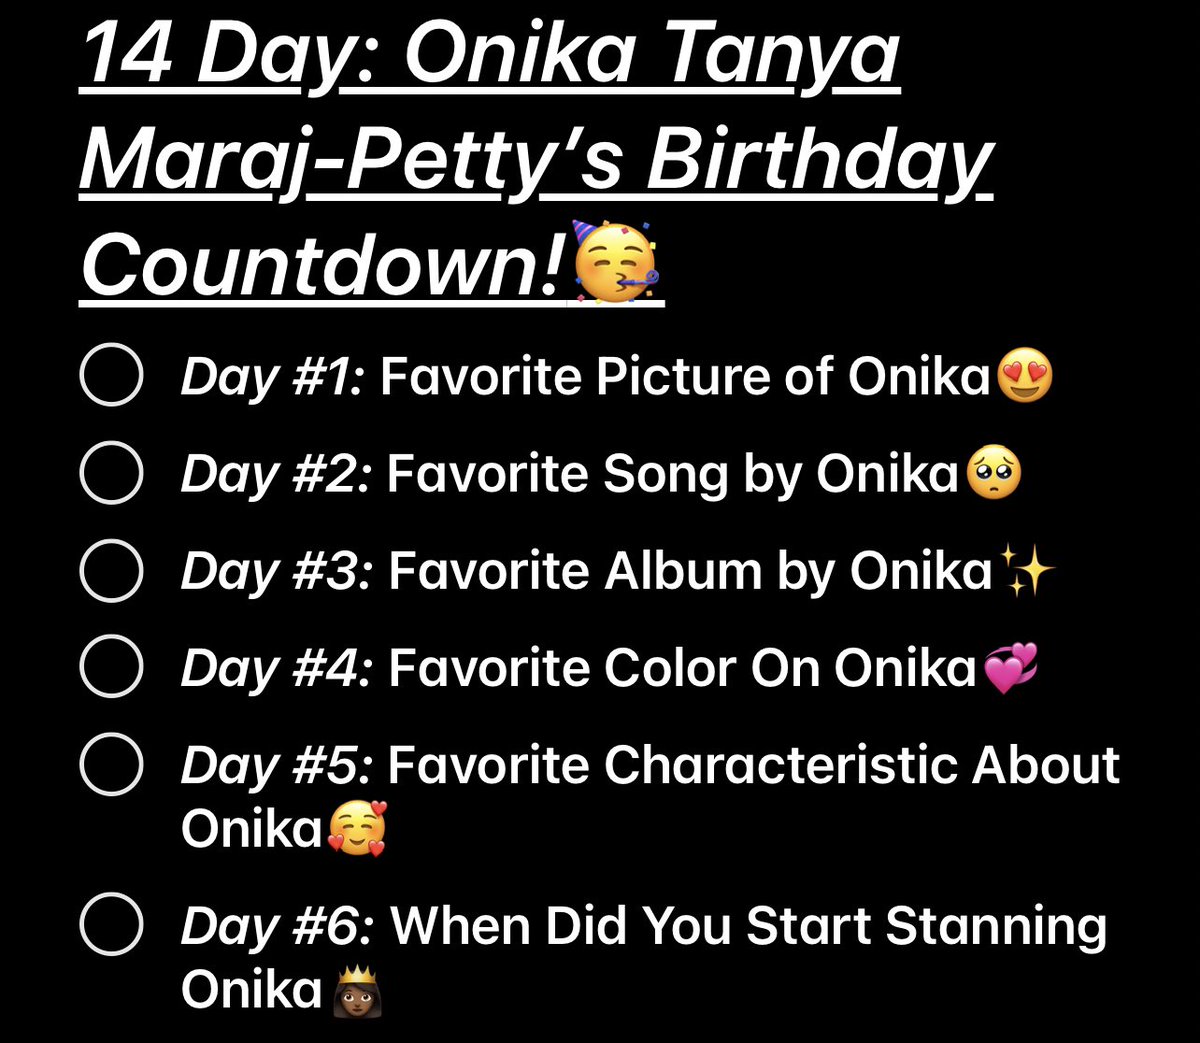 14 Day: Onika Tanya Maraj-Petty’s Birthday Countdown!  #NickiMinaj    @NICKIMINAJ ATTENTION ALL  #BARBZ    What better way to show our LOVE and celebrate then to do a Countdown Celebration?! I have set out Days that everybody can follow! RETWEET DAY #1 IS TODAY SEE THREAD 